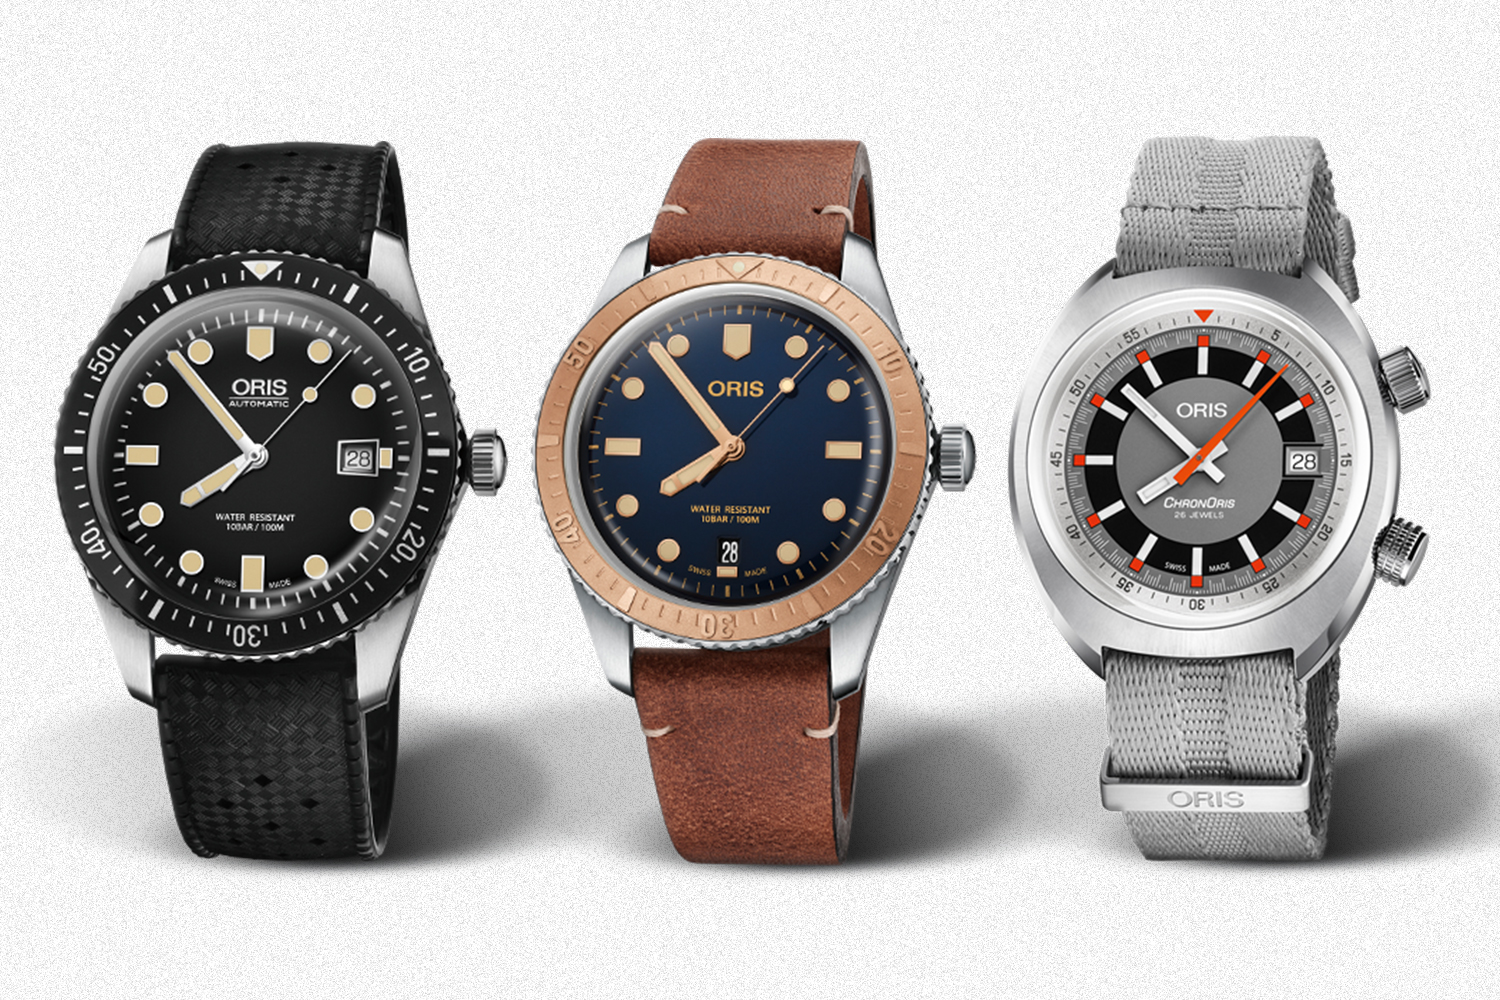 Get Big Discounts on Oris Watches at This Mr Porter Sale - InsideHook